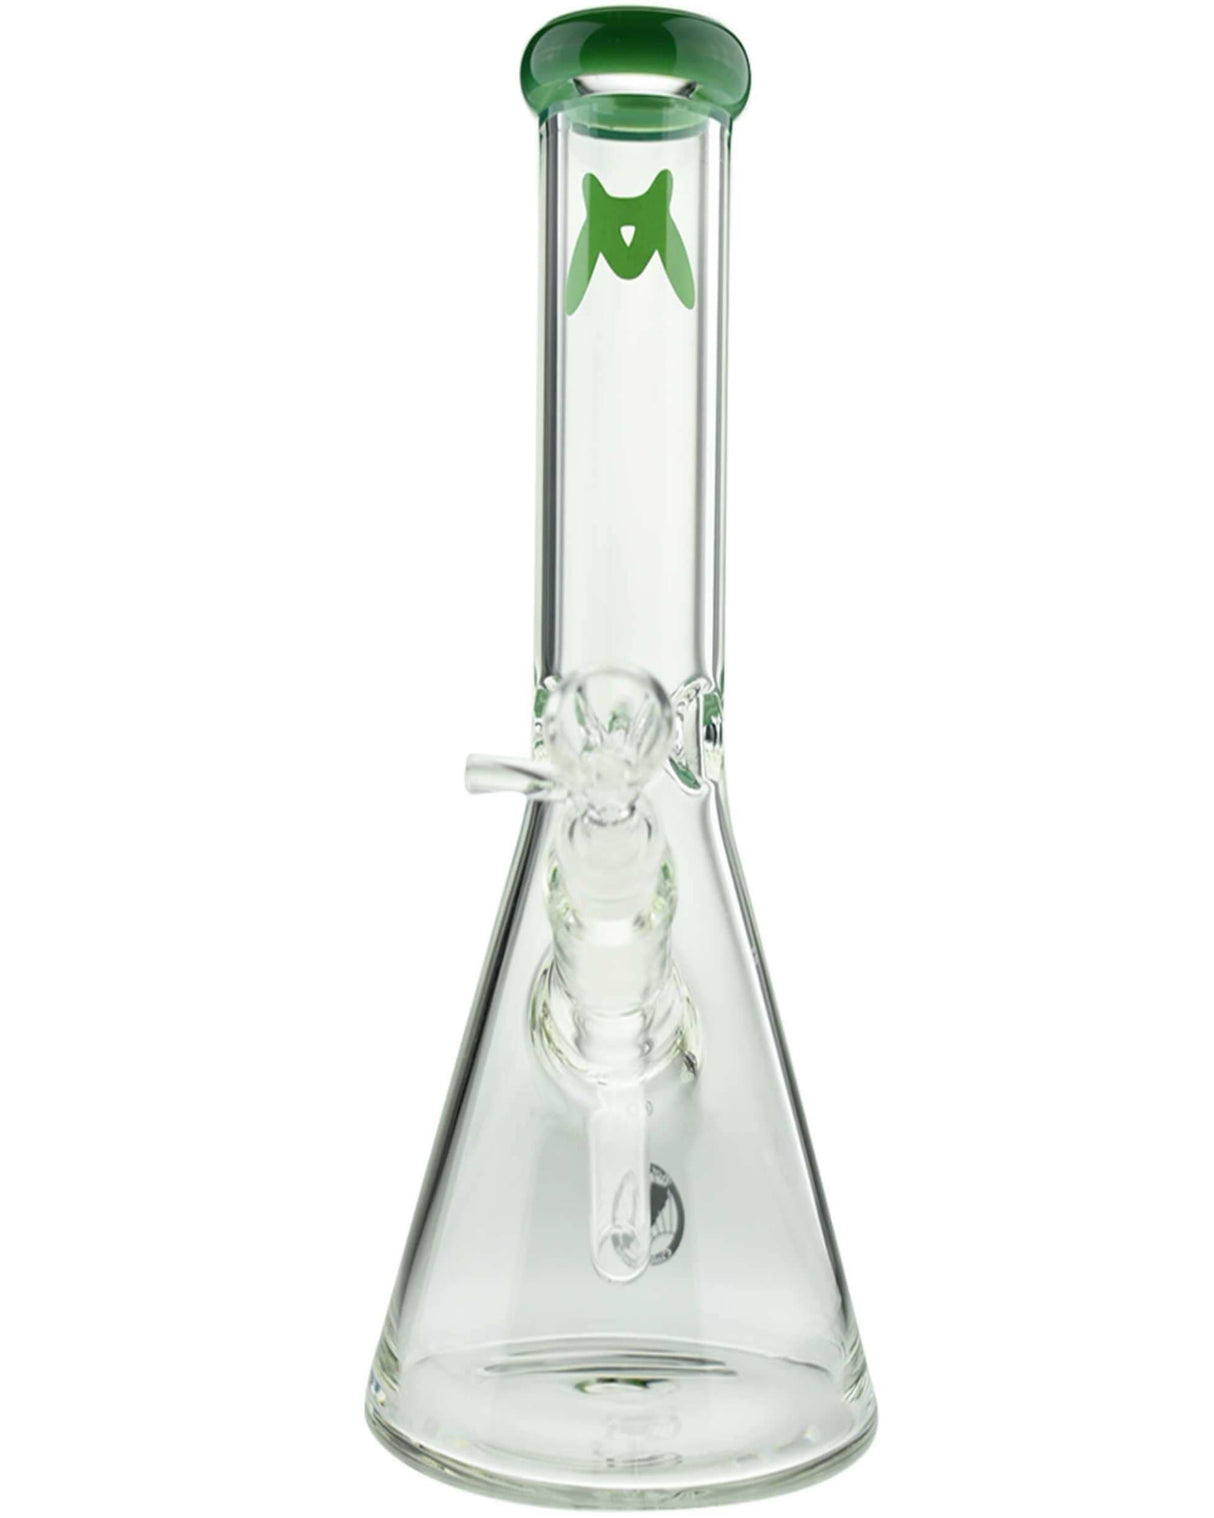 MAV Glass - 44mm Forest Green Color Top Beaker Bong with Glass on Glass Joint